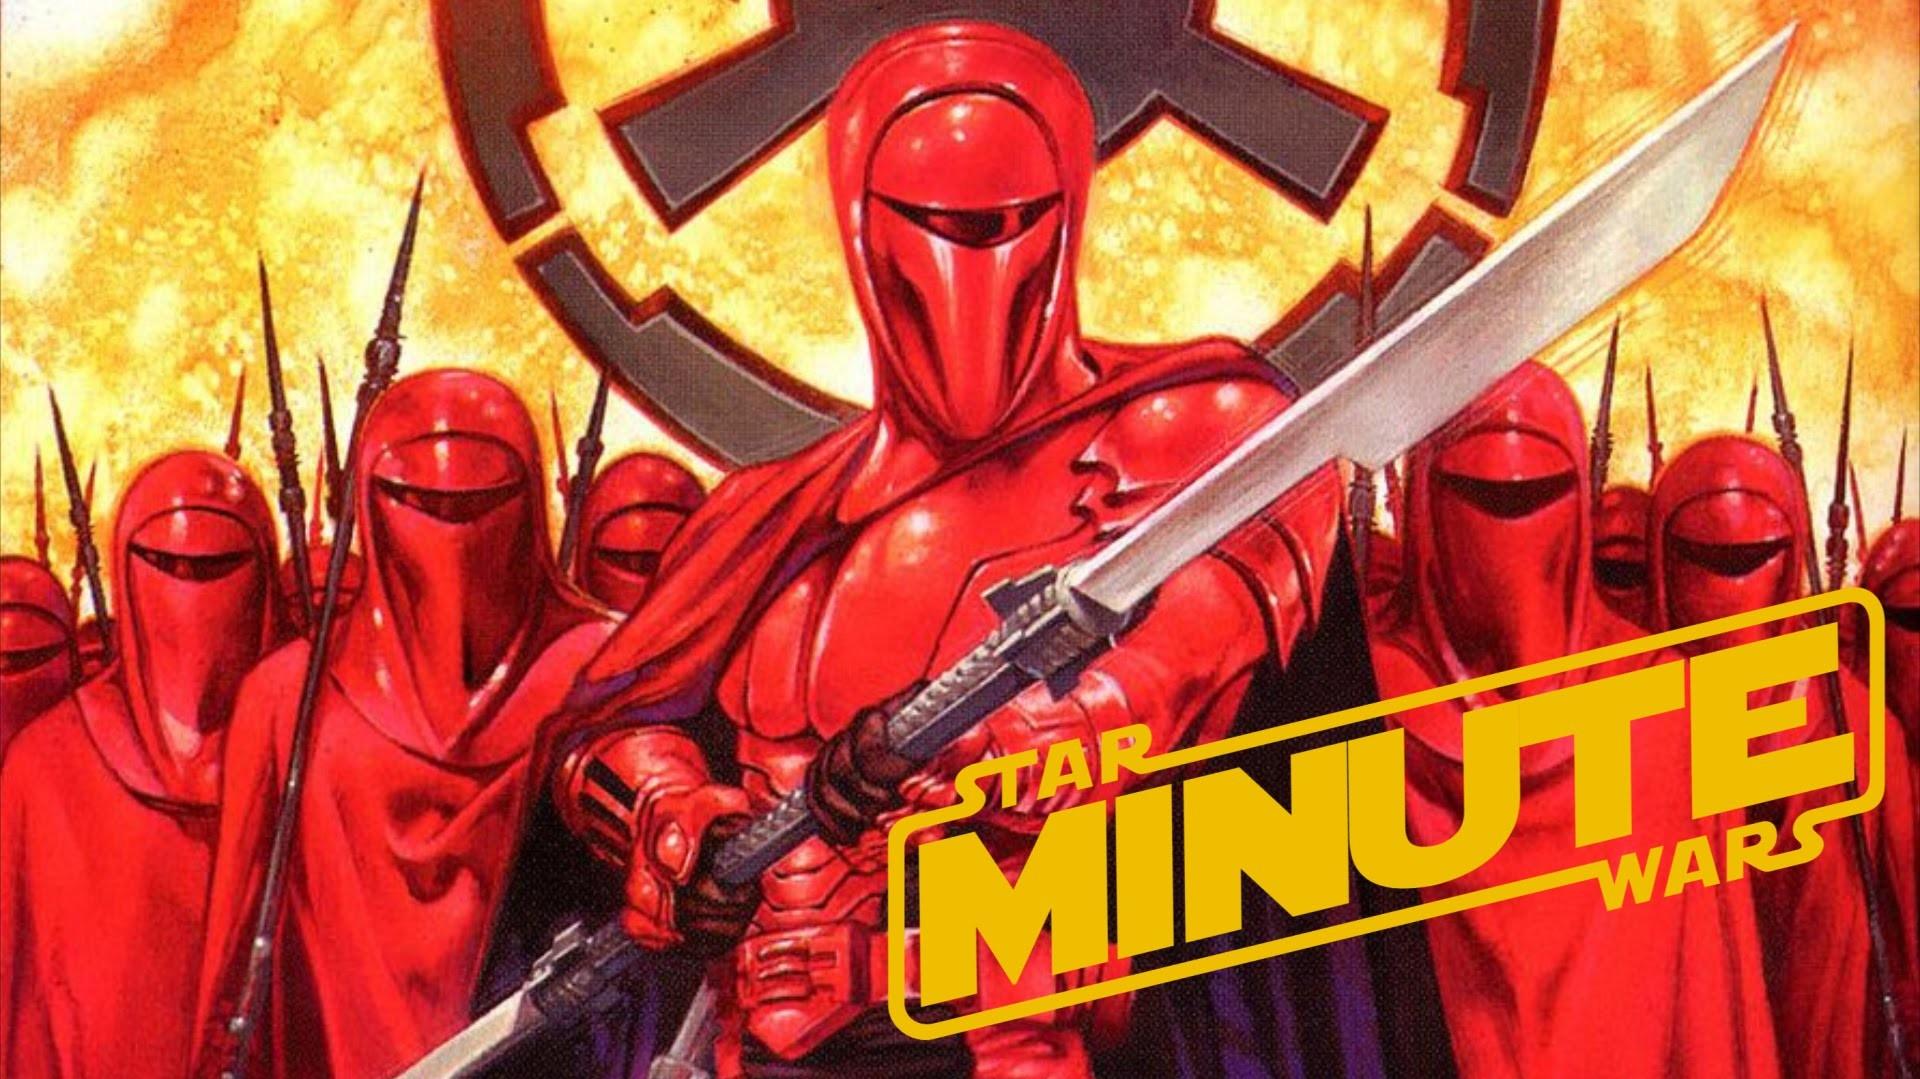 Star Wars Imperial Guard Pictures To Pin Pinsdaddy